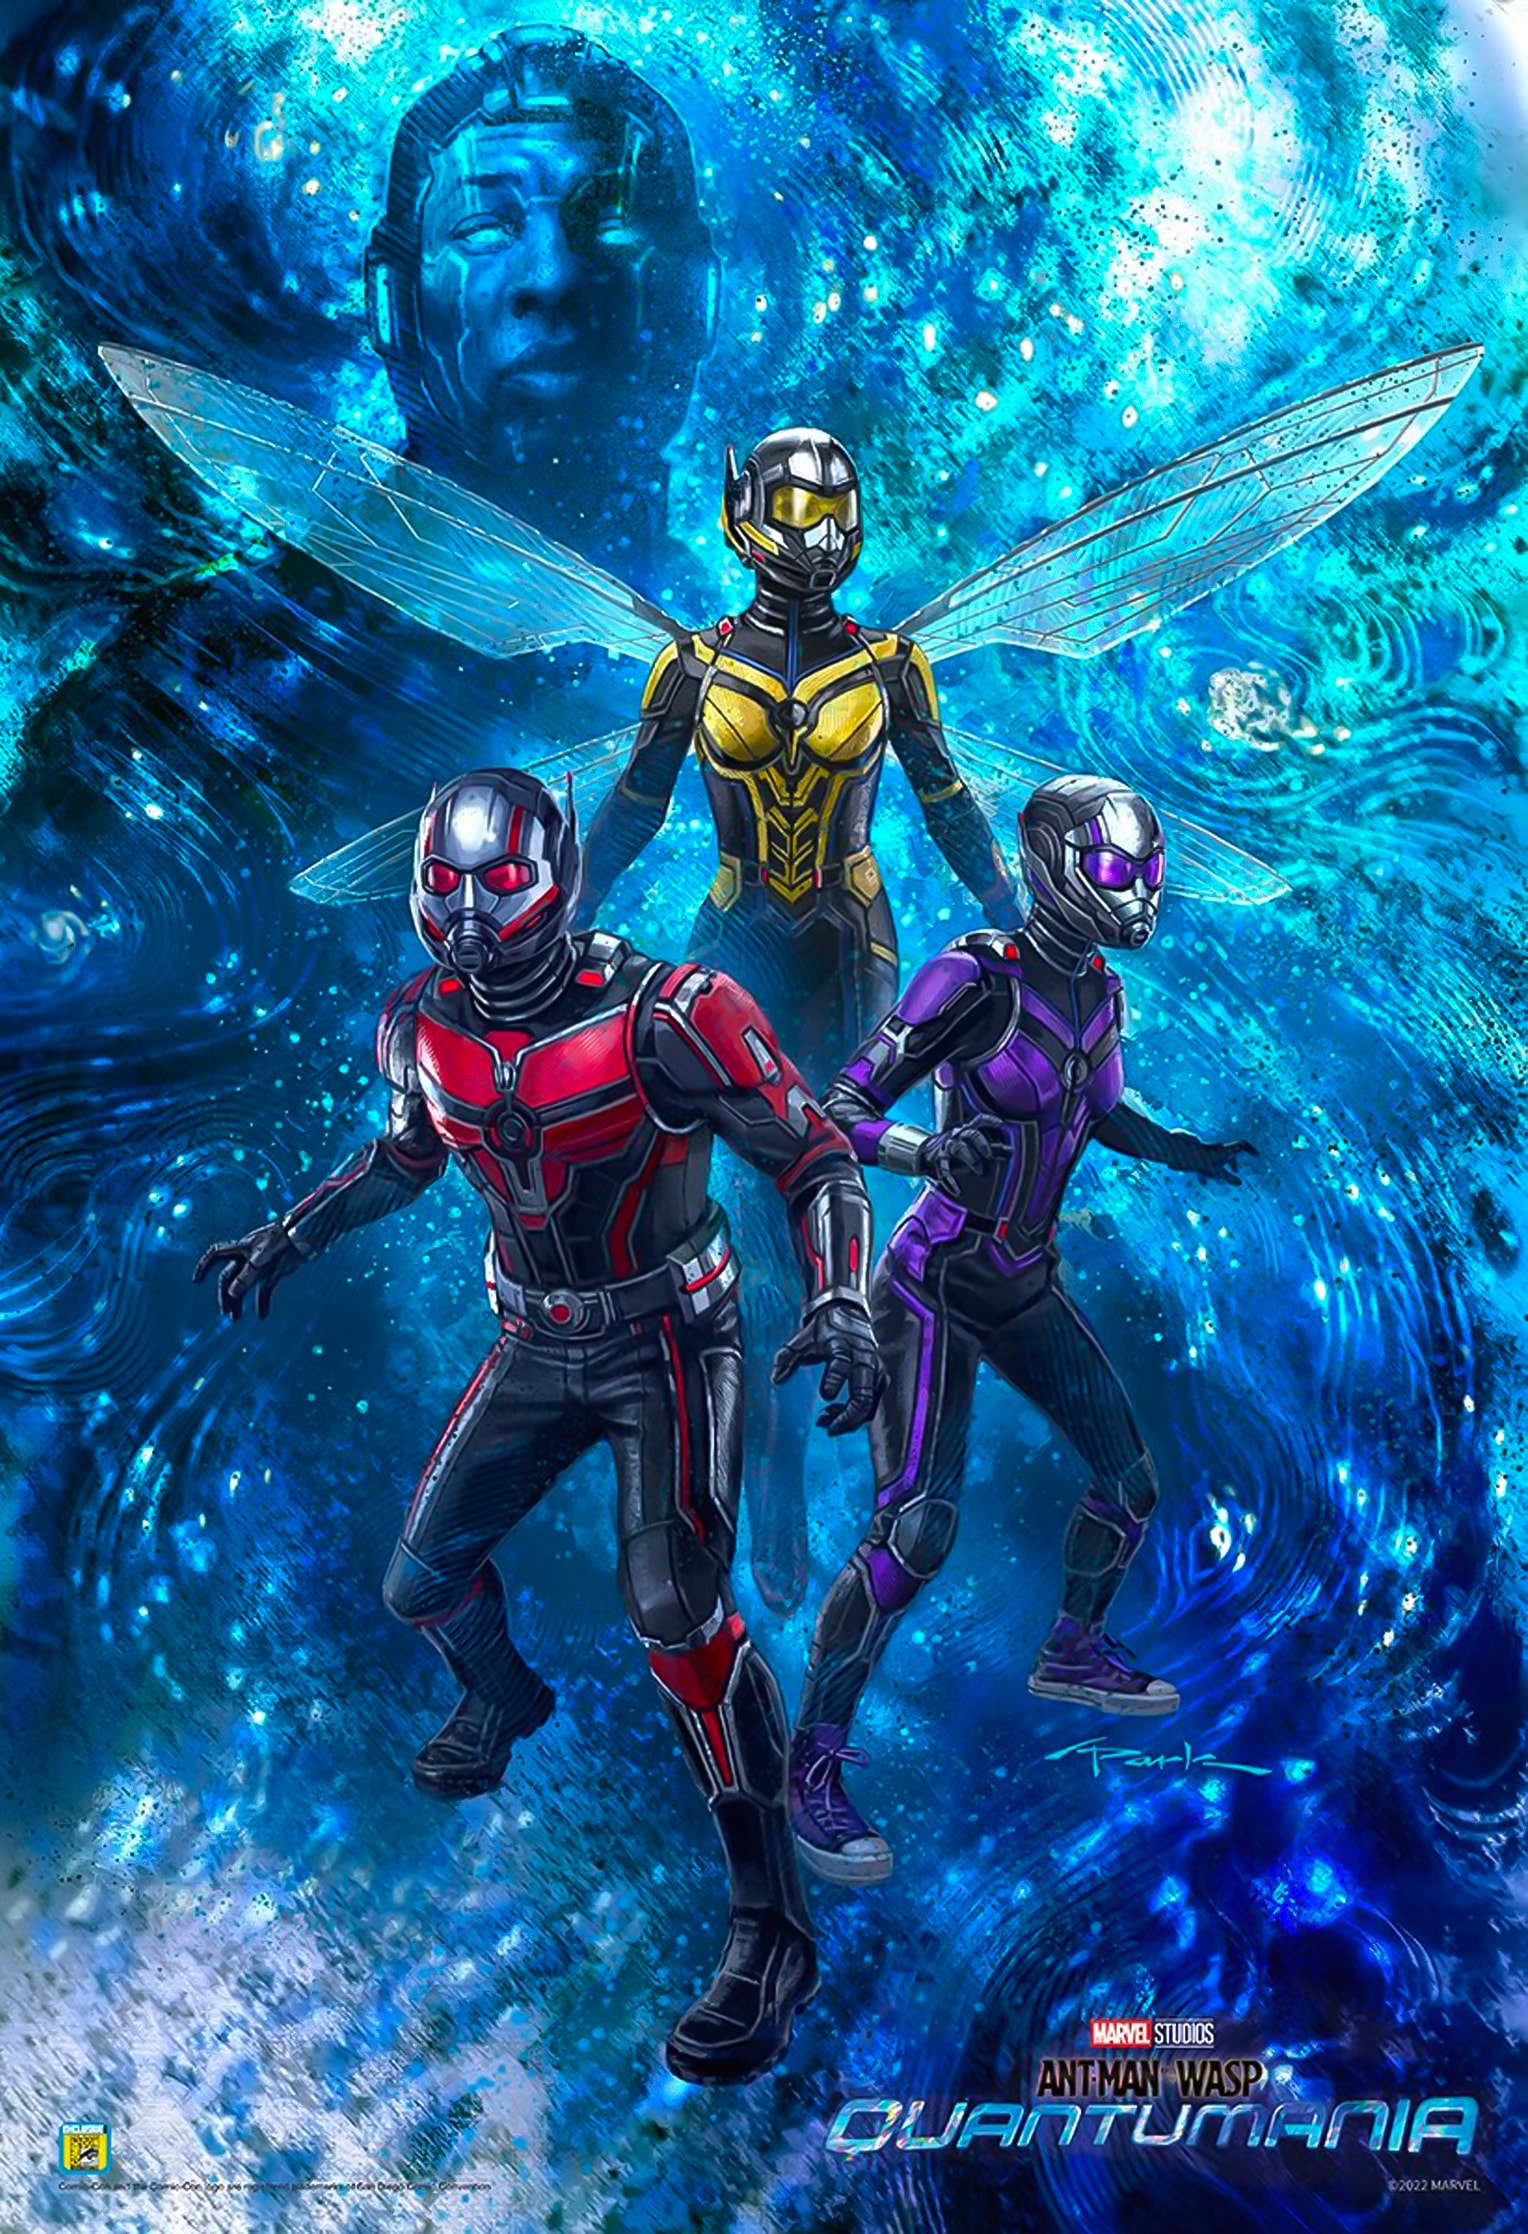 Ant-Man and the Wasp: Quantumania First Look Kang the Conqueror Reveal Info SDCC San Diego Comic Con Release Date Cassie Lang Stature